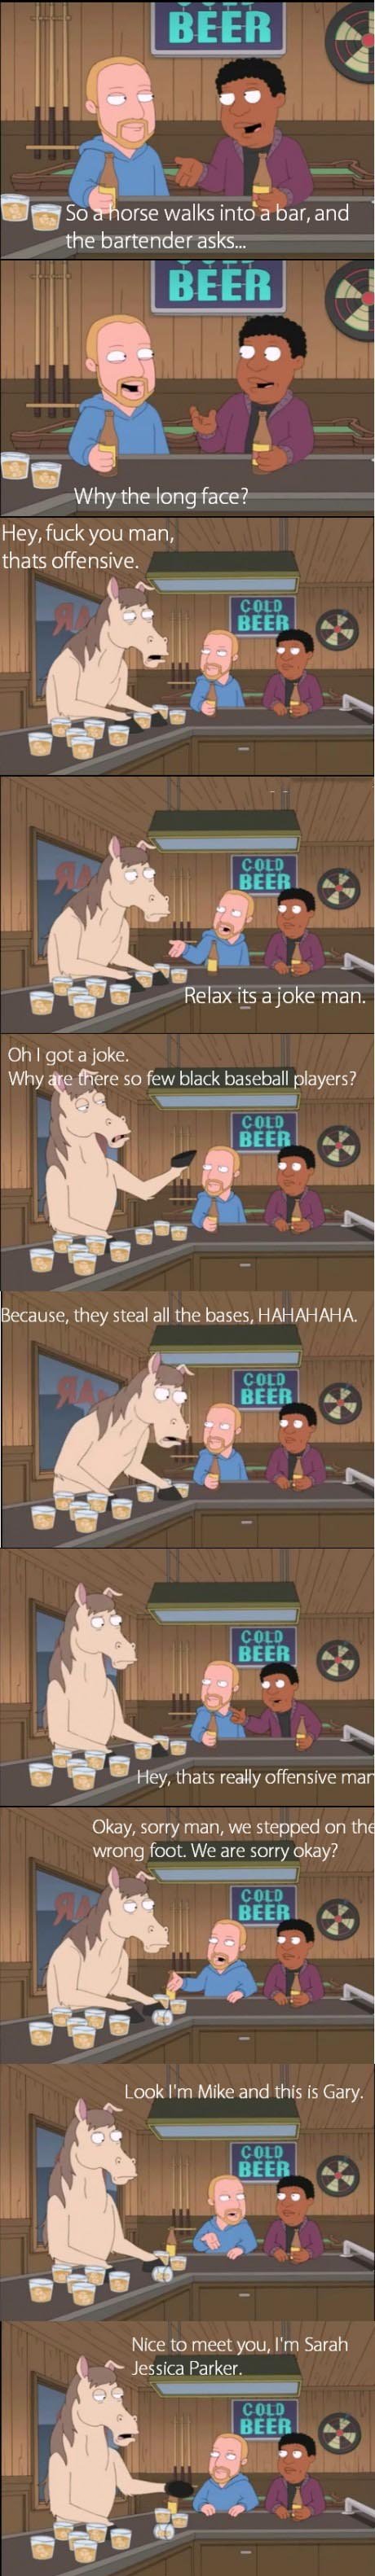 sarah jessica parker family guy - Beer O So a horse walks into a bar, and the bartender asks... Beer Why the long face? Hey, fuck you man, thats offensive. Cold Beer Cold Beer Relax its a joke man. Oh I got a joke. Why are there so few black baseball play